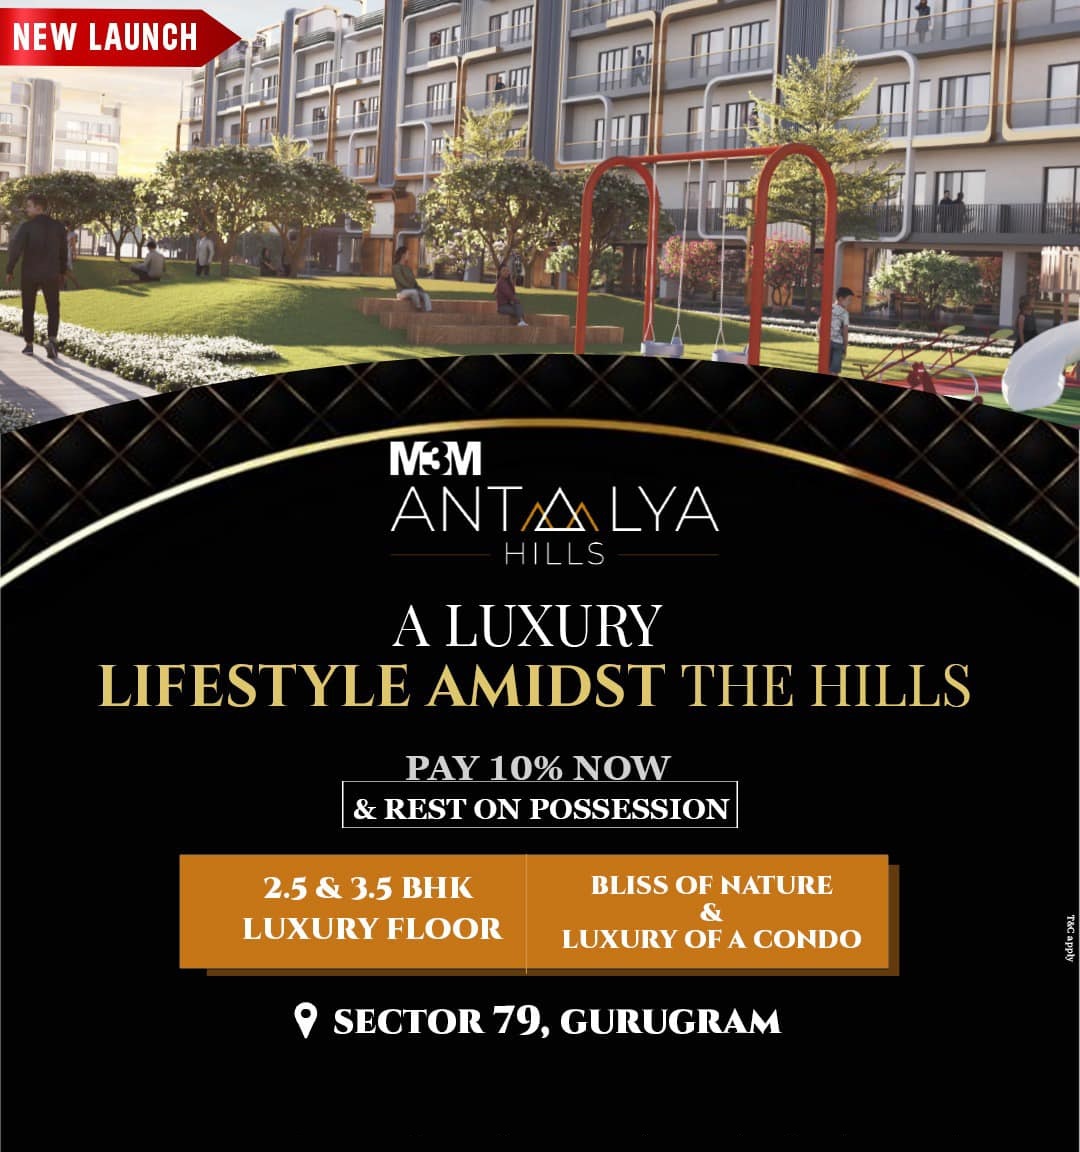 Pay just 10% now and rest on possession at M3M Antalya Hills, Gurgaon Update